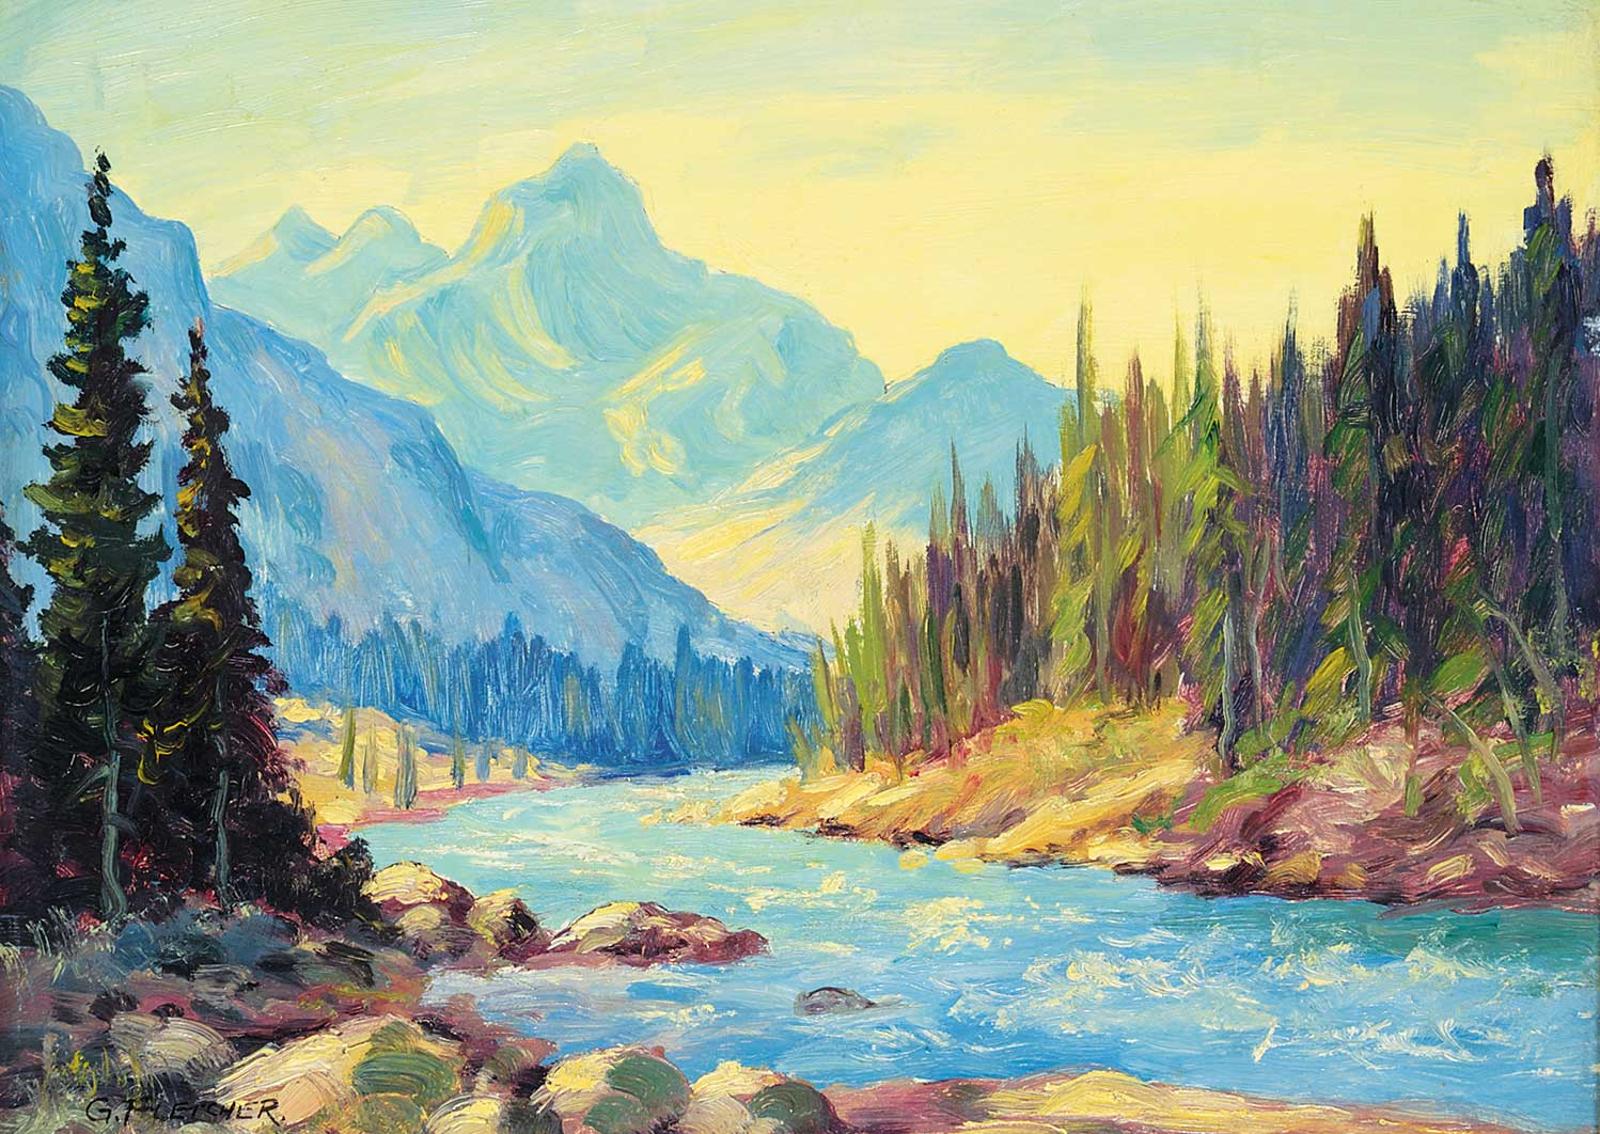 George Fletcher (1914-1987) - Untitled - River in the Rockies